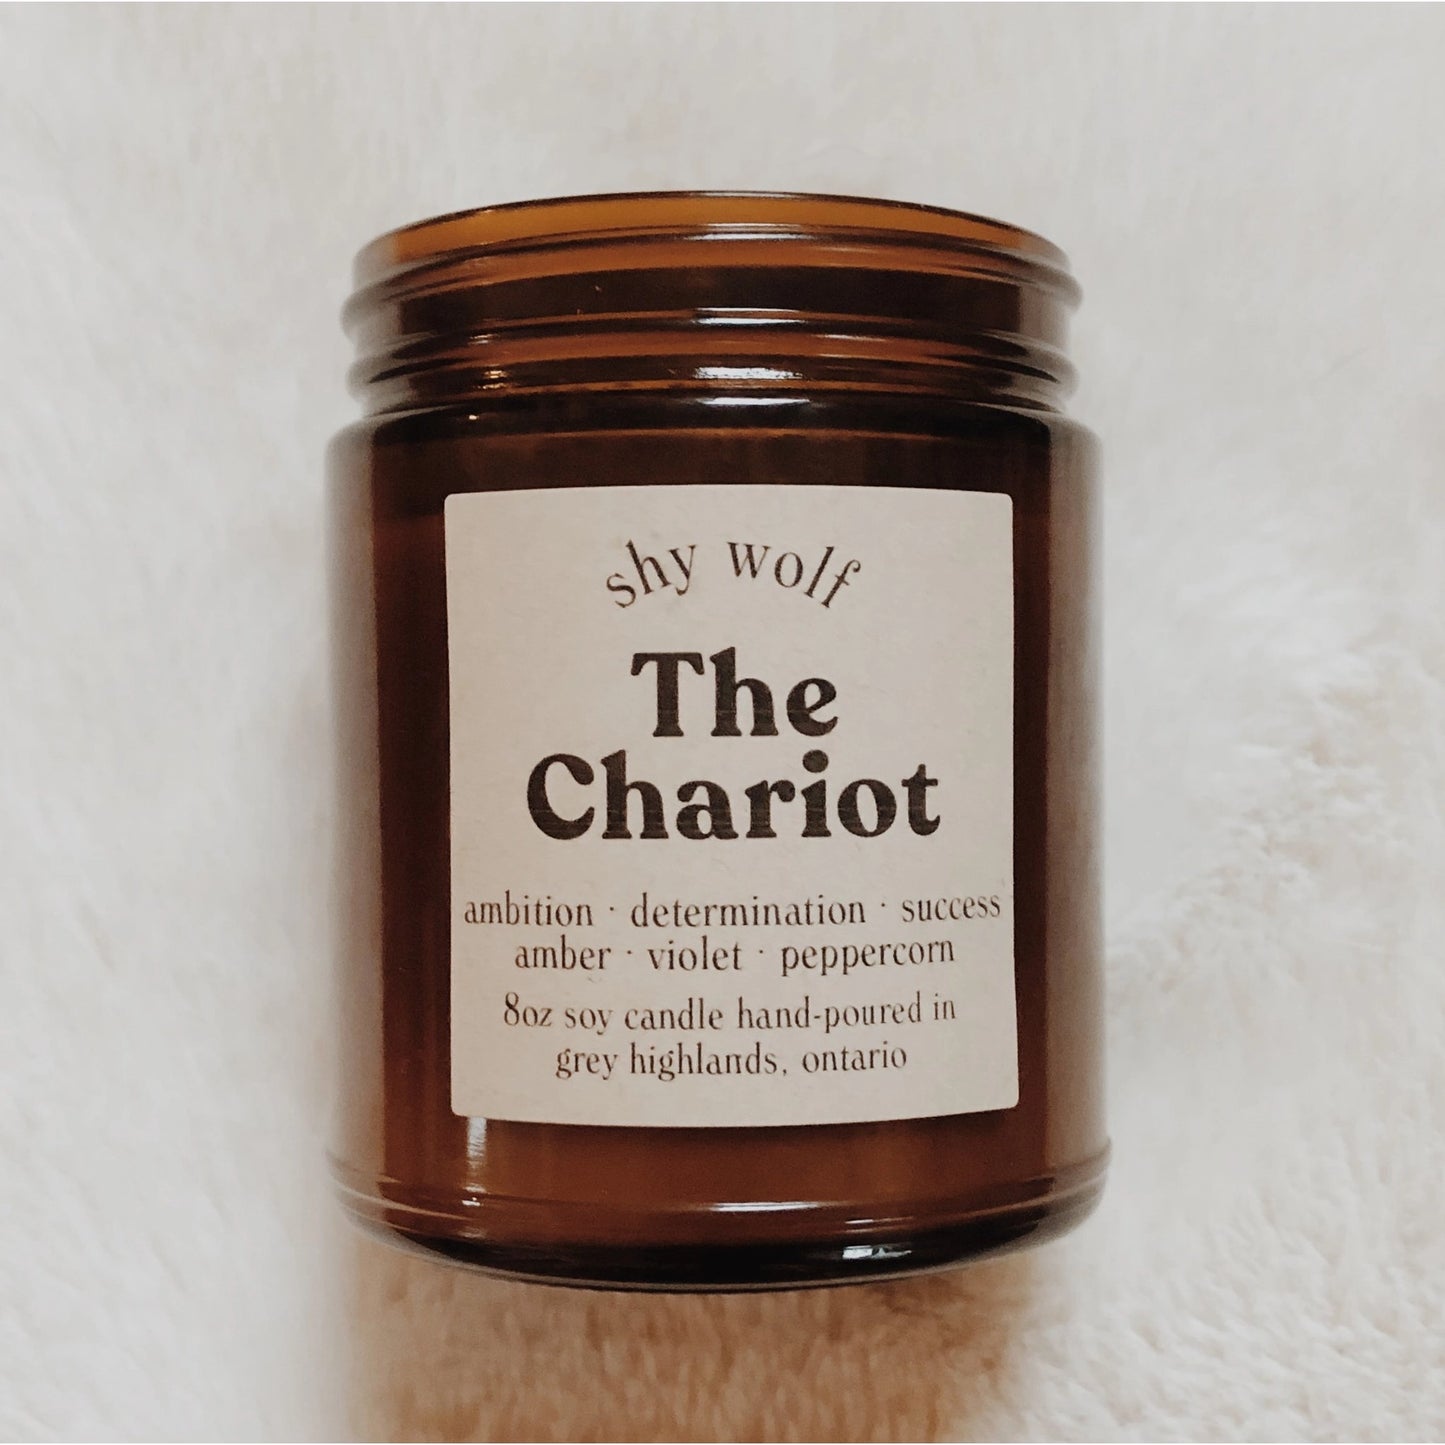 Shy Wolf Tarot Candle | The Chariot